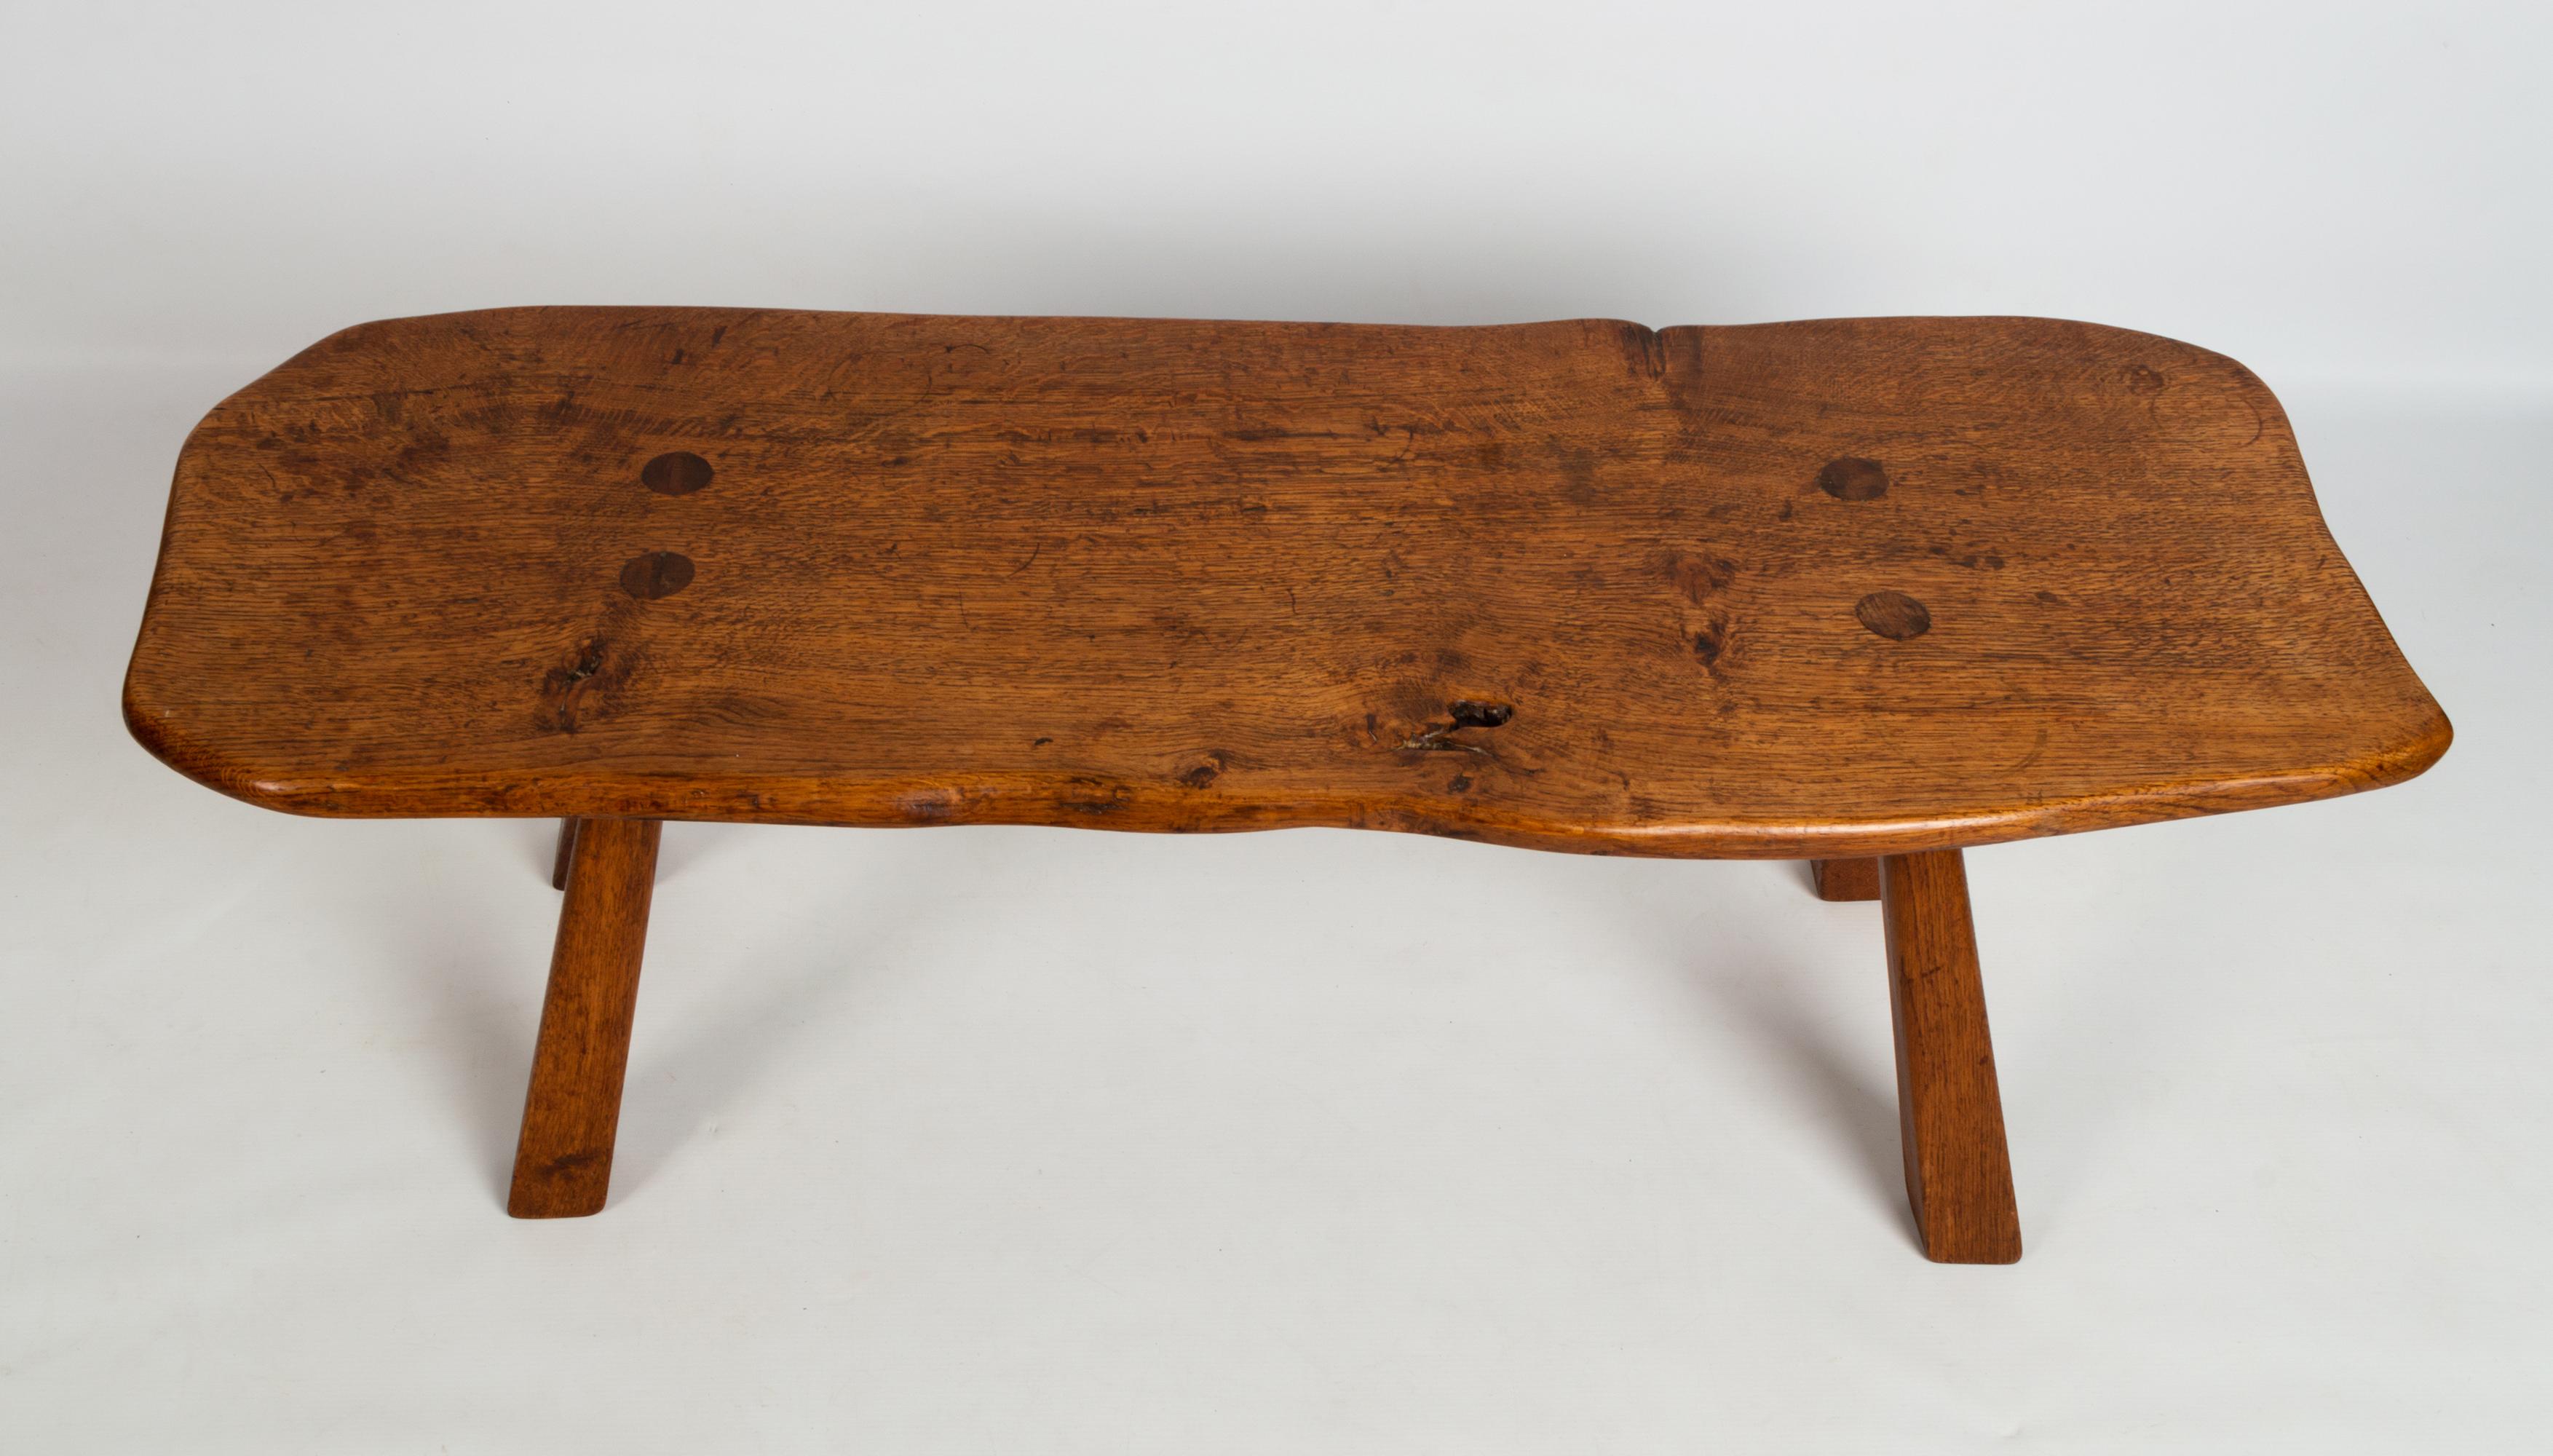  English Arts & Crafts Cotswolds School Oak Bench Coffee Table Console, C.1950 In Good Condition For Sale In London, GB